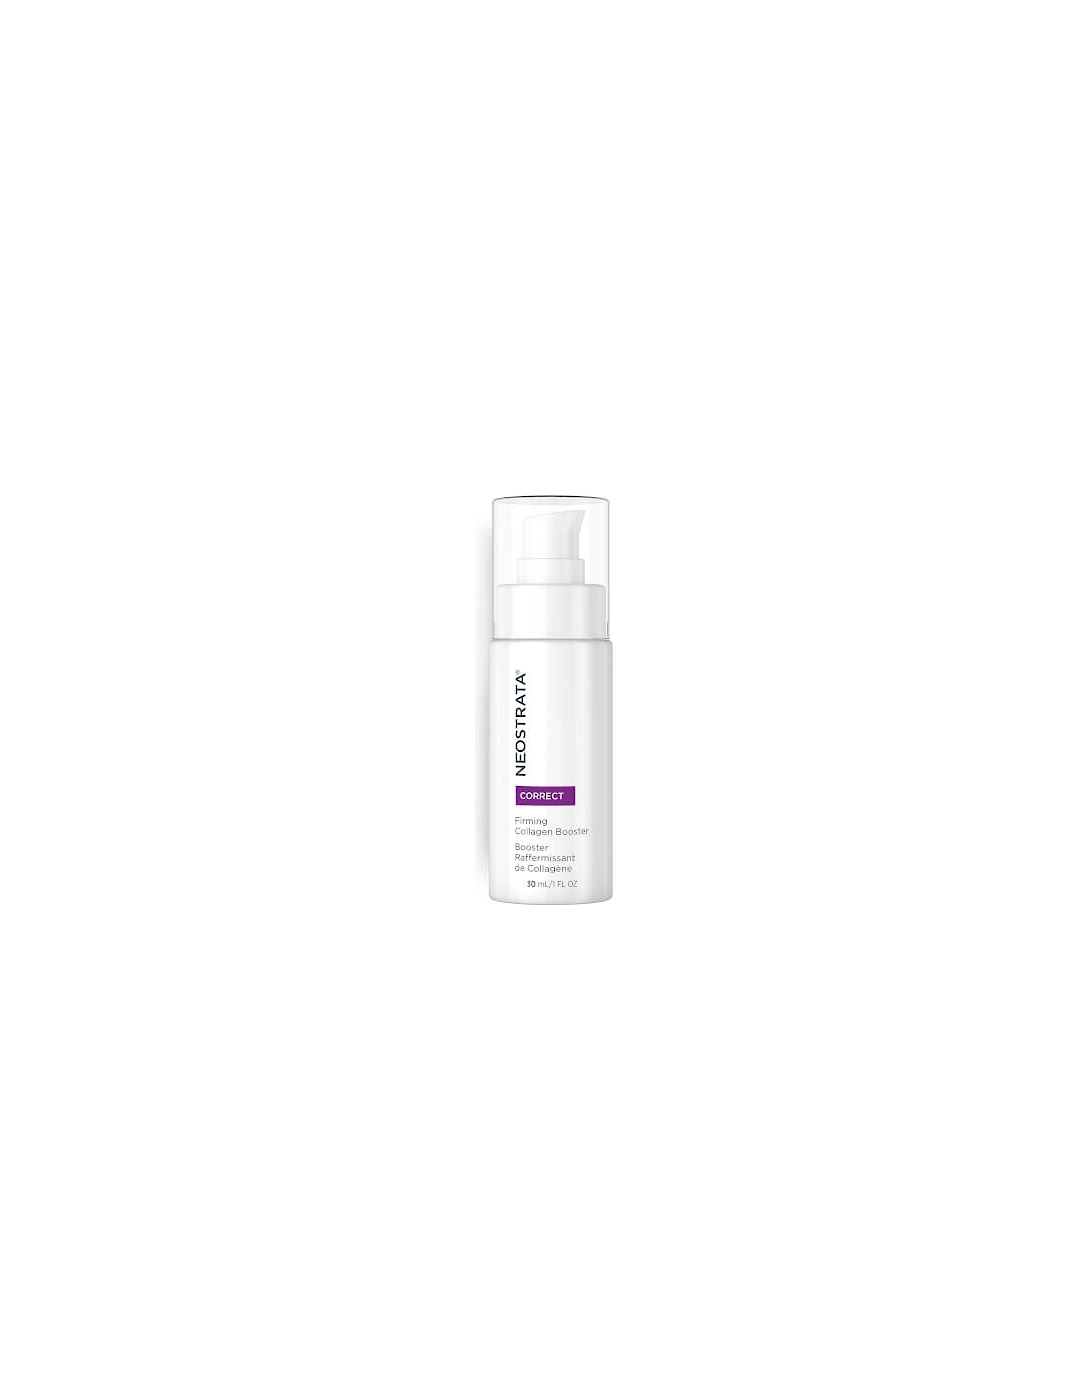 Correct Skin Active Firming Collagen Booster Serum for Mature Skin 30ml, 2 of 1